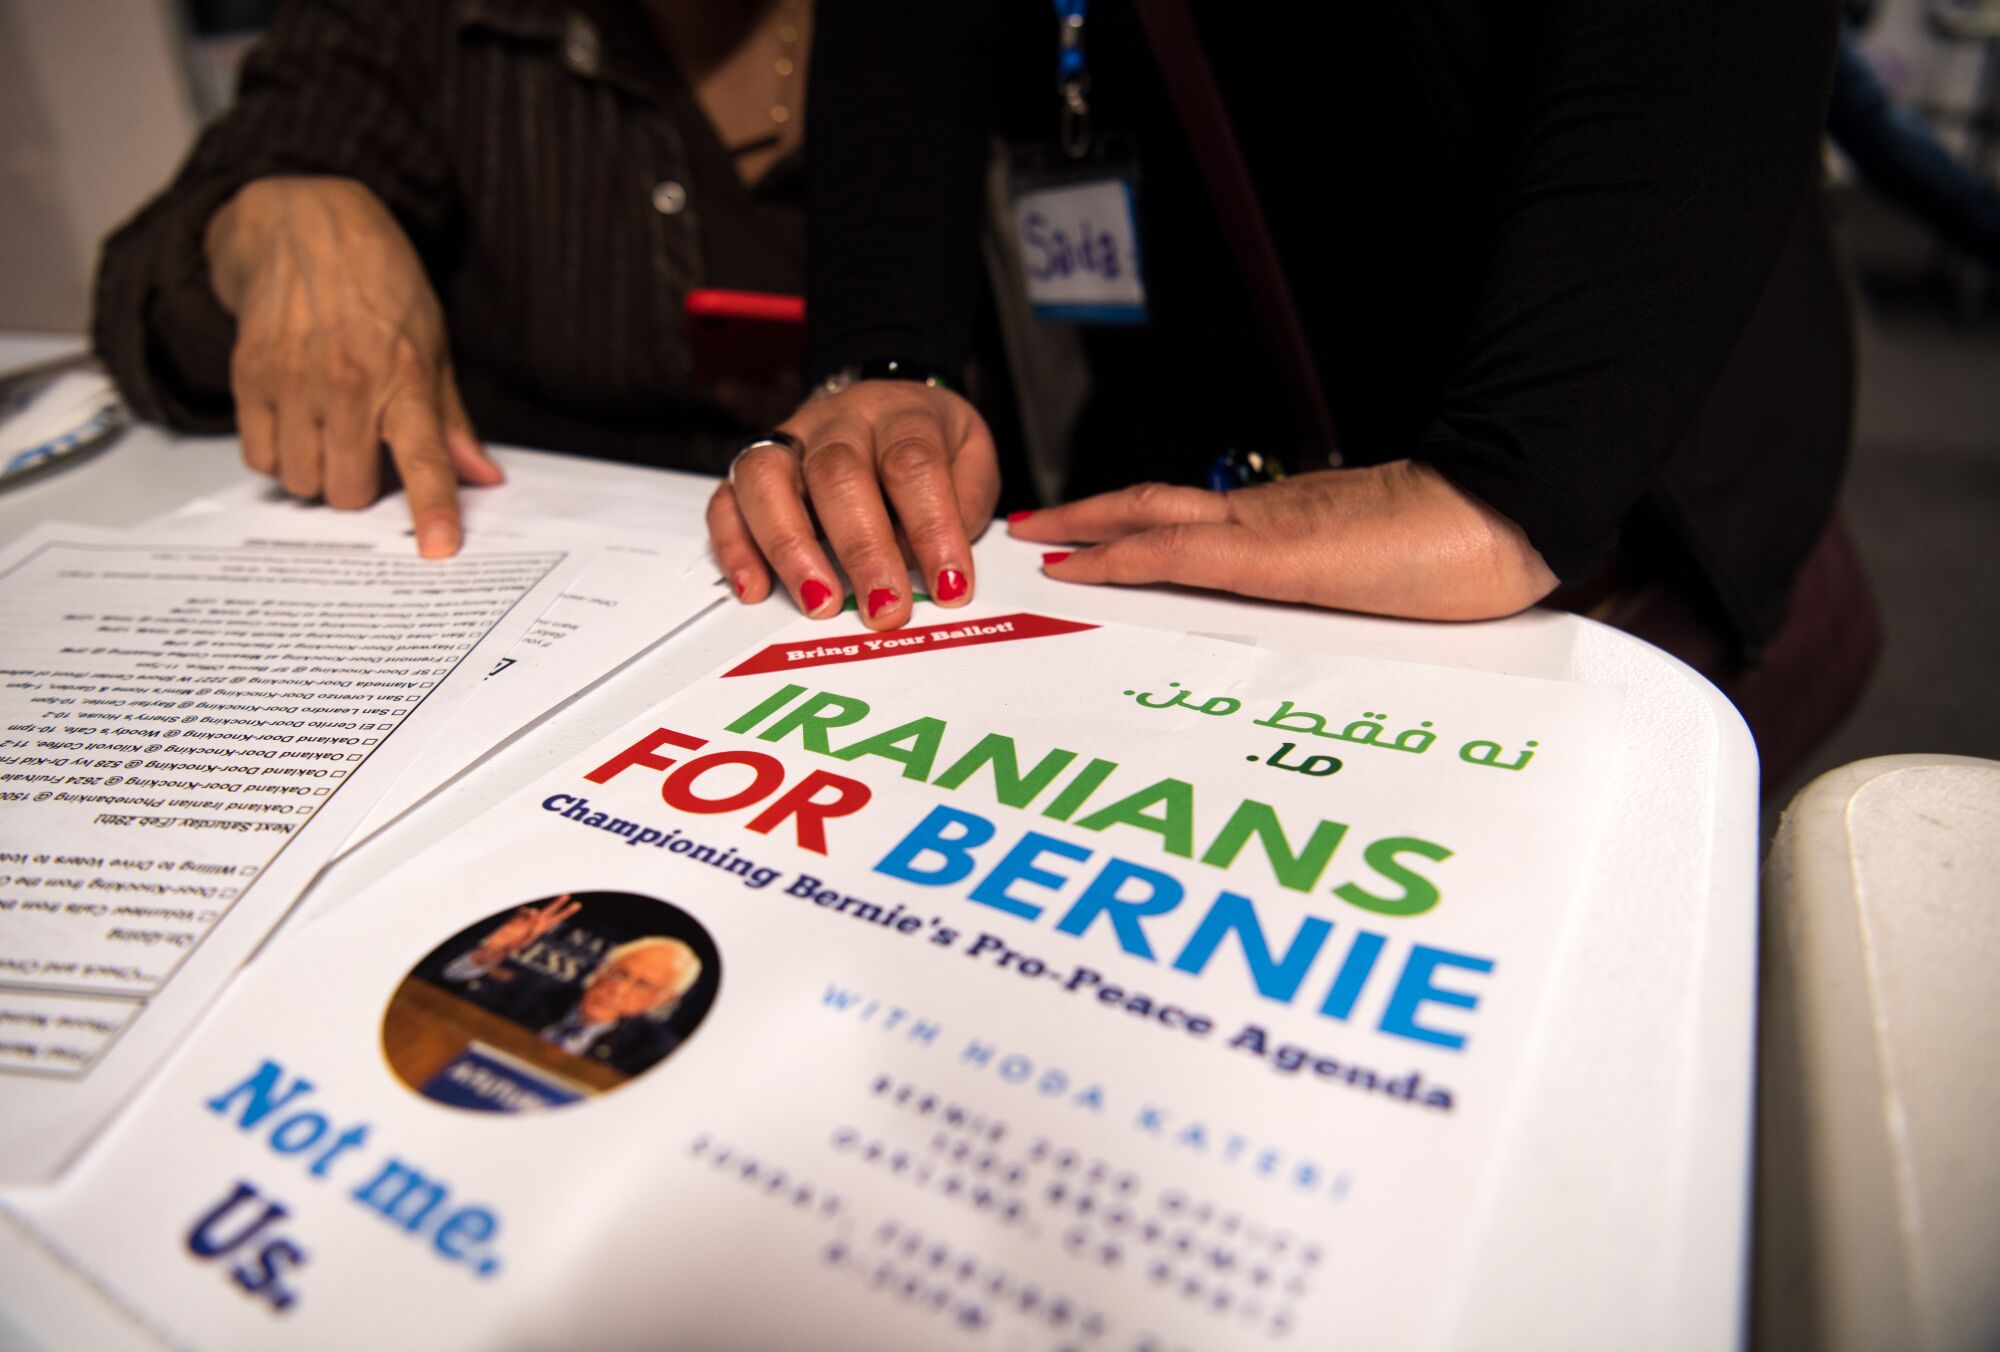 Iranian Americans gathered at an Iranians for Bernie meeting at Bernie Sanders' Oakland campaign office